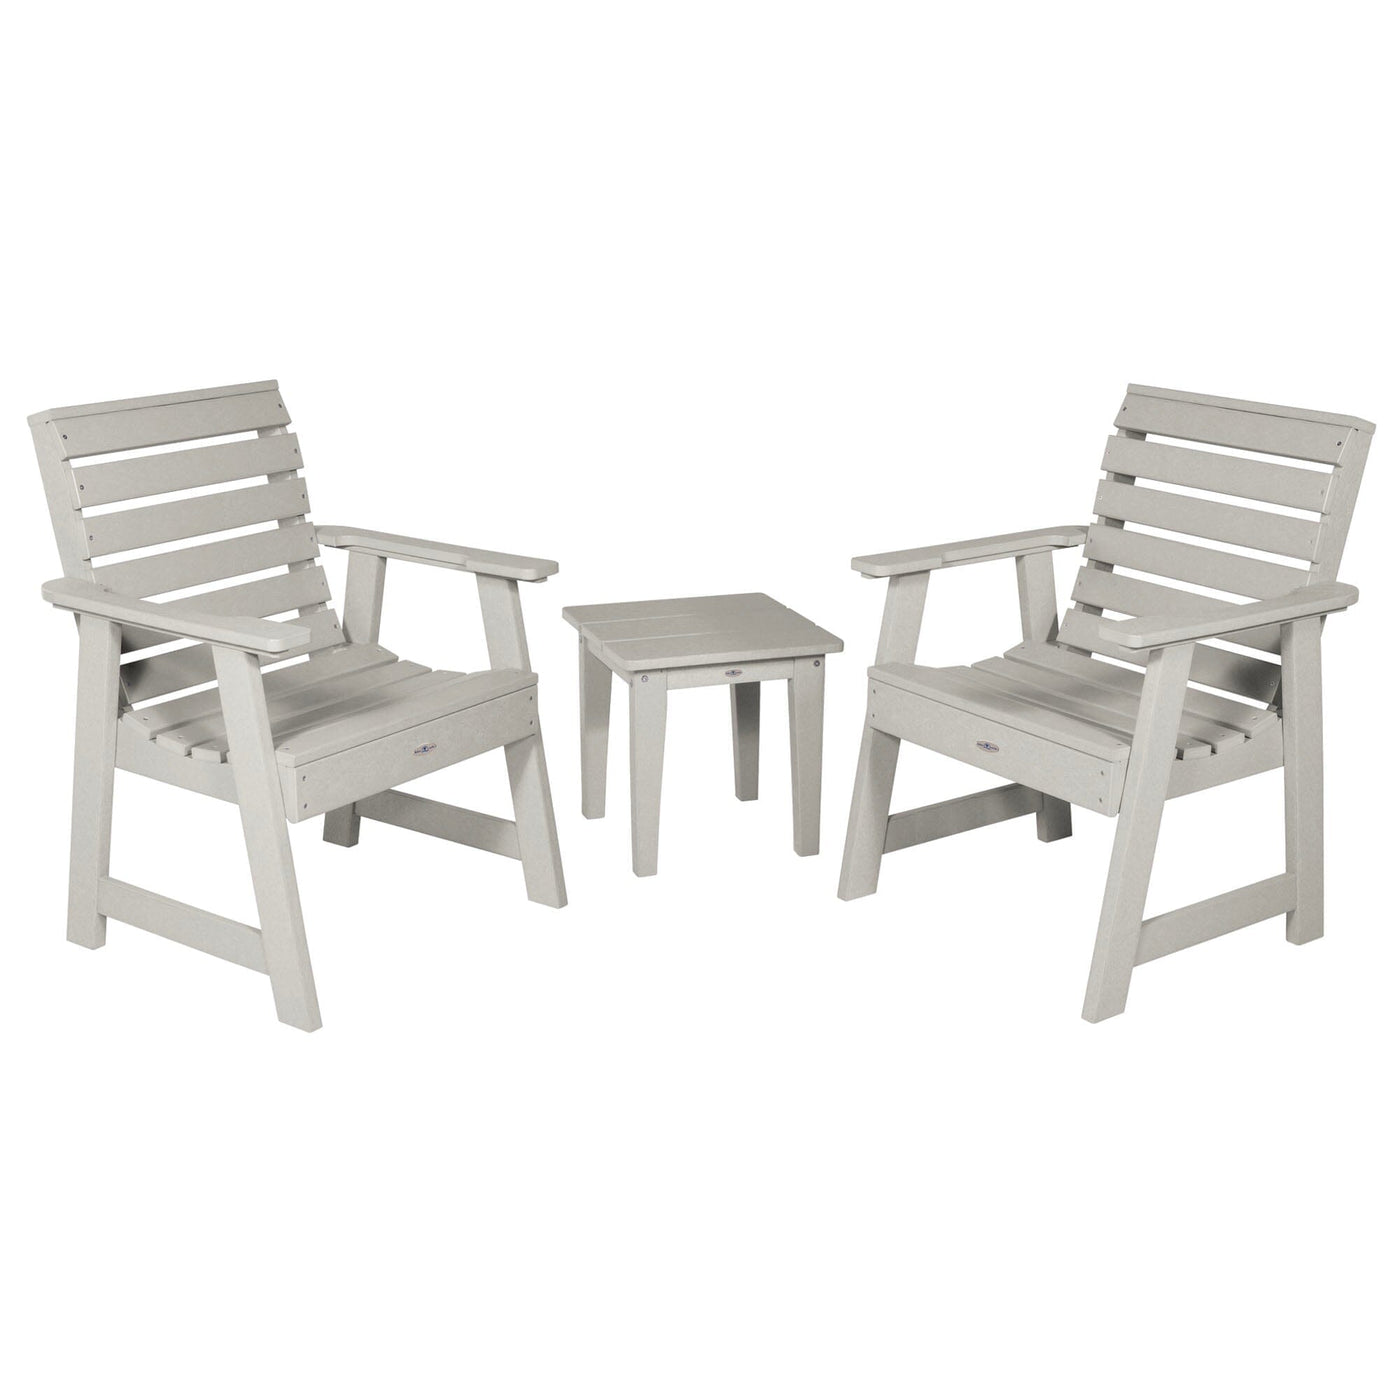 Two Riverside Garden Chairs and Side Table Set Kitted Set Bahia Verde Outdoors Cove Gray 